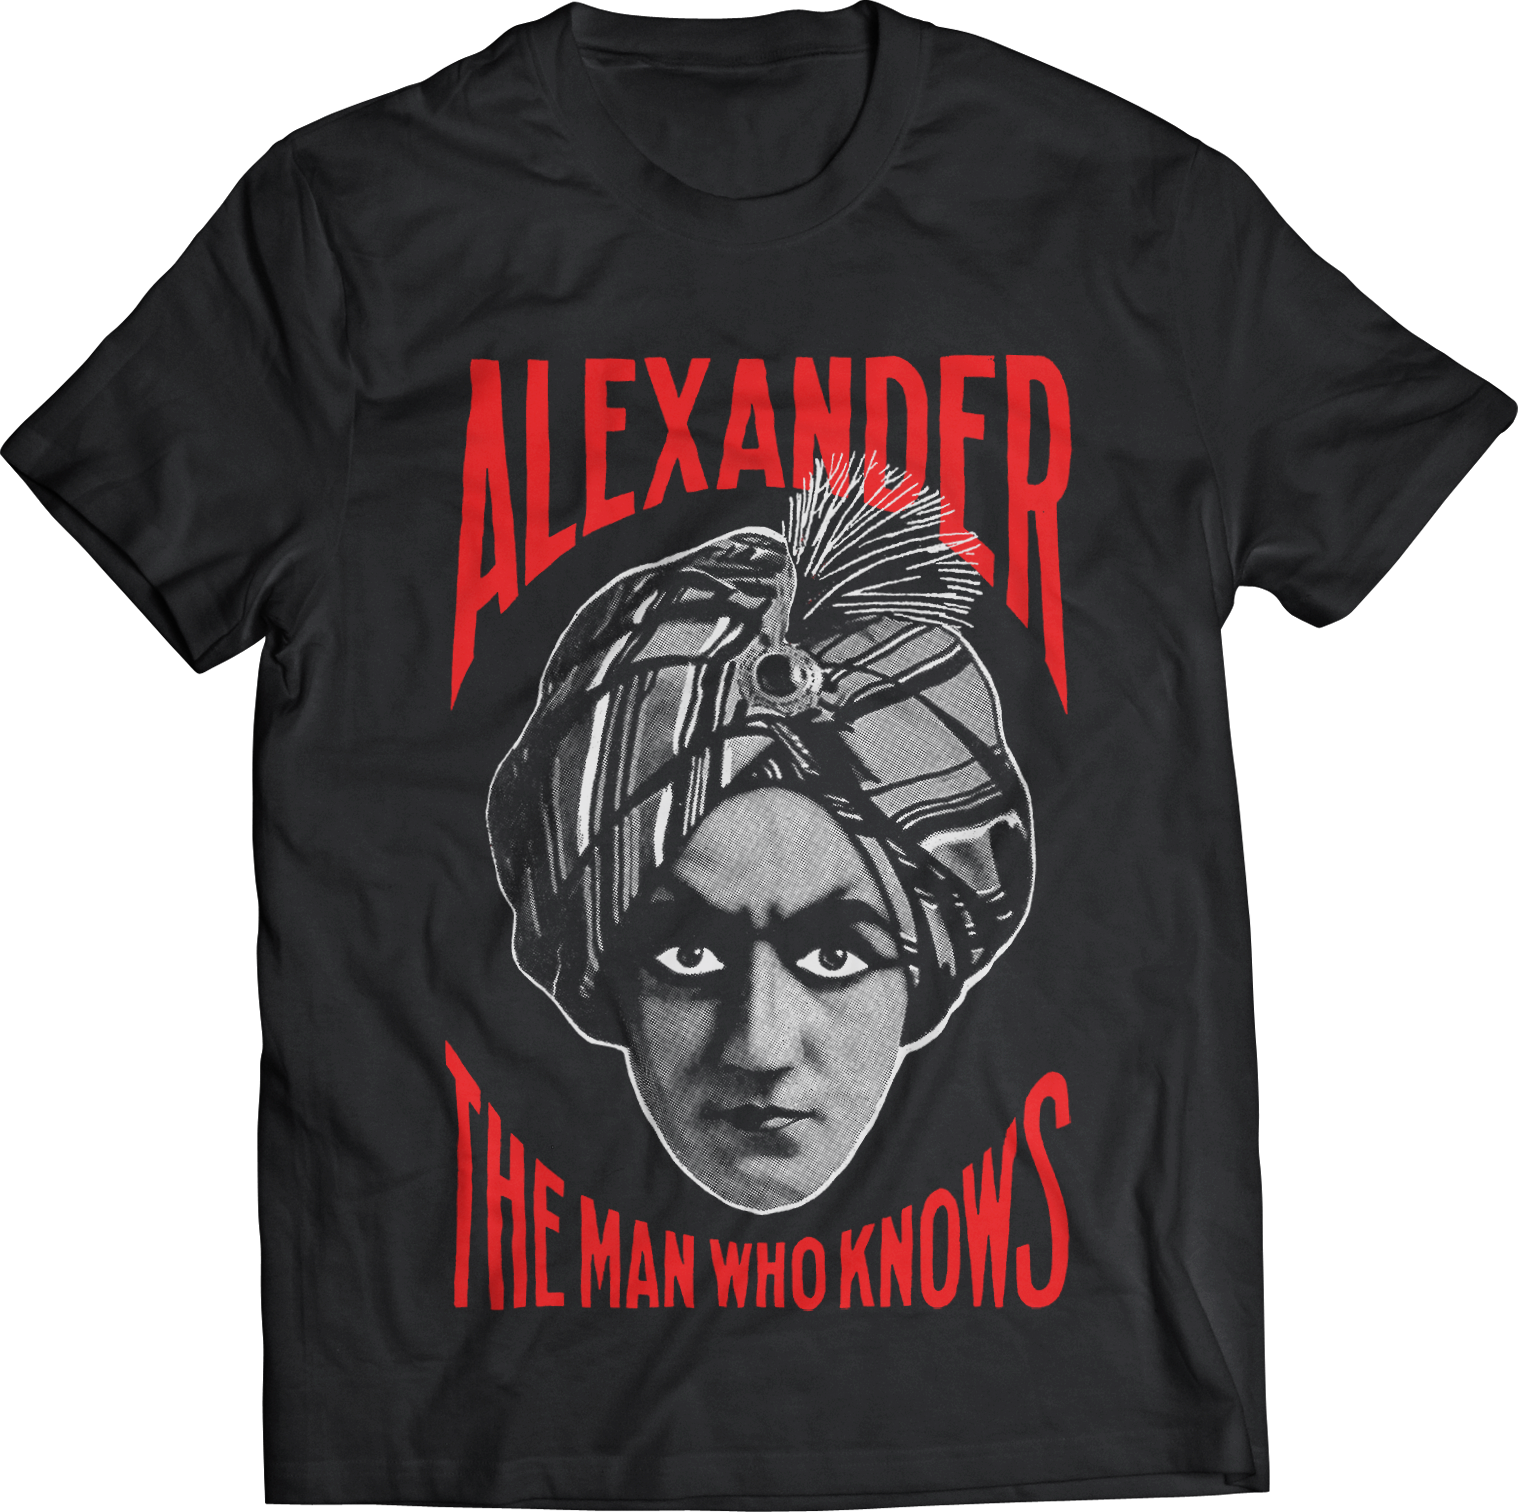 ATOM AGE: "ALEXANDER - THE MAN WHO KNOWS" T-SHIRT